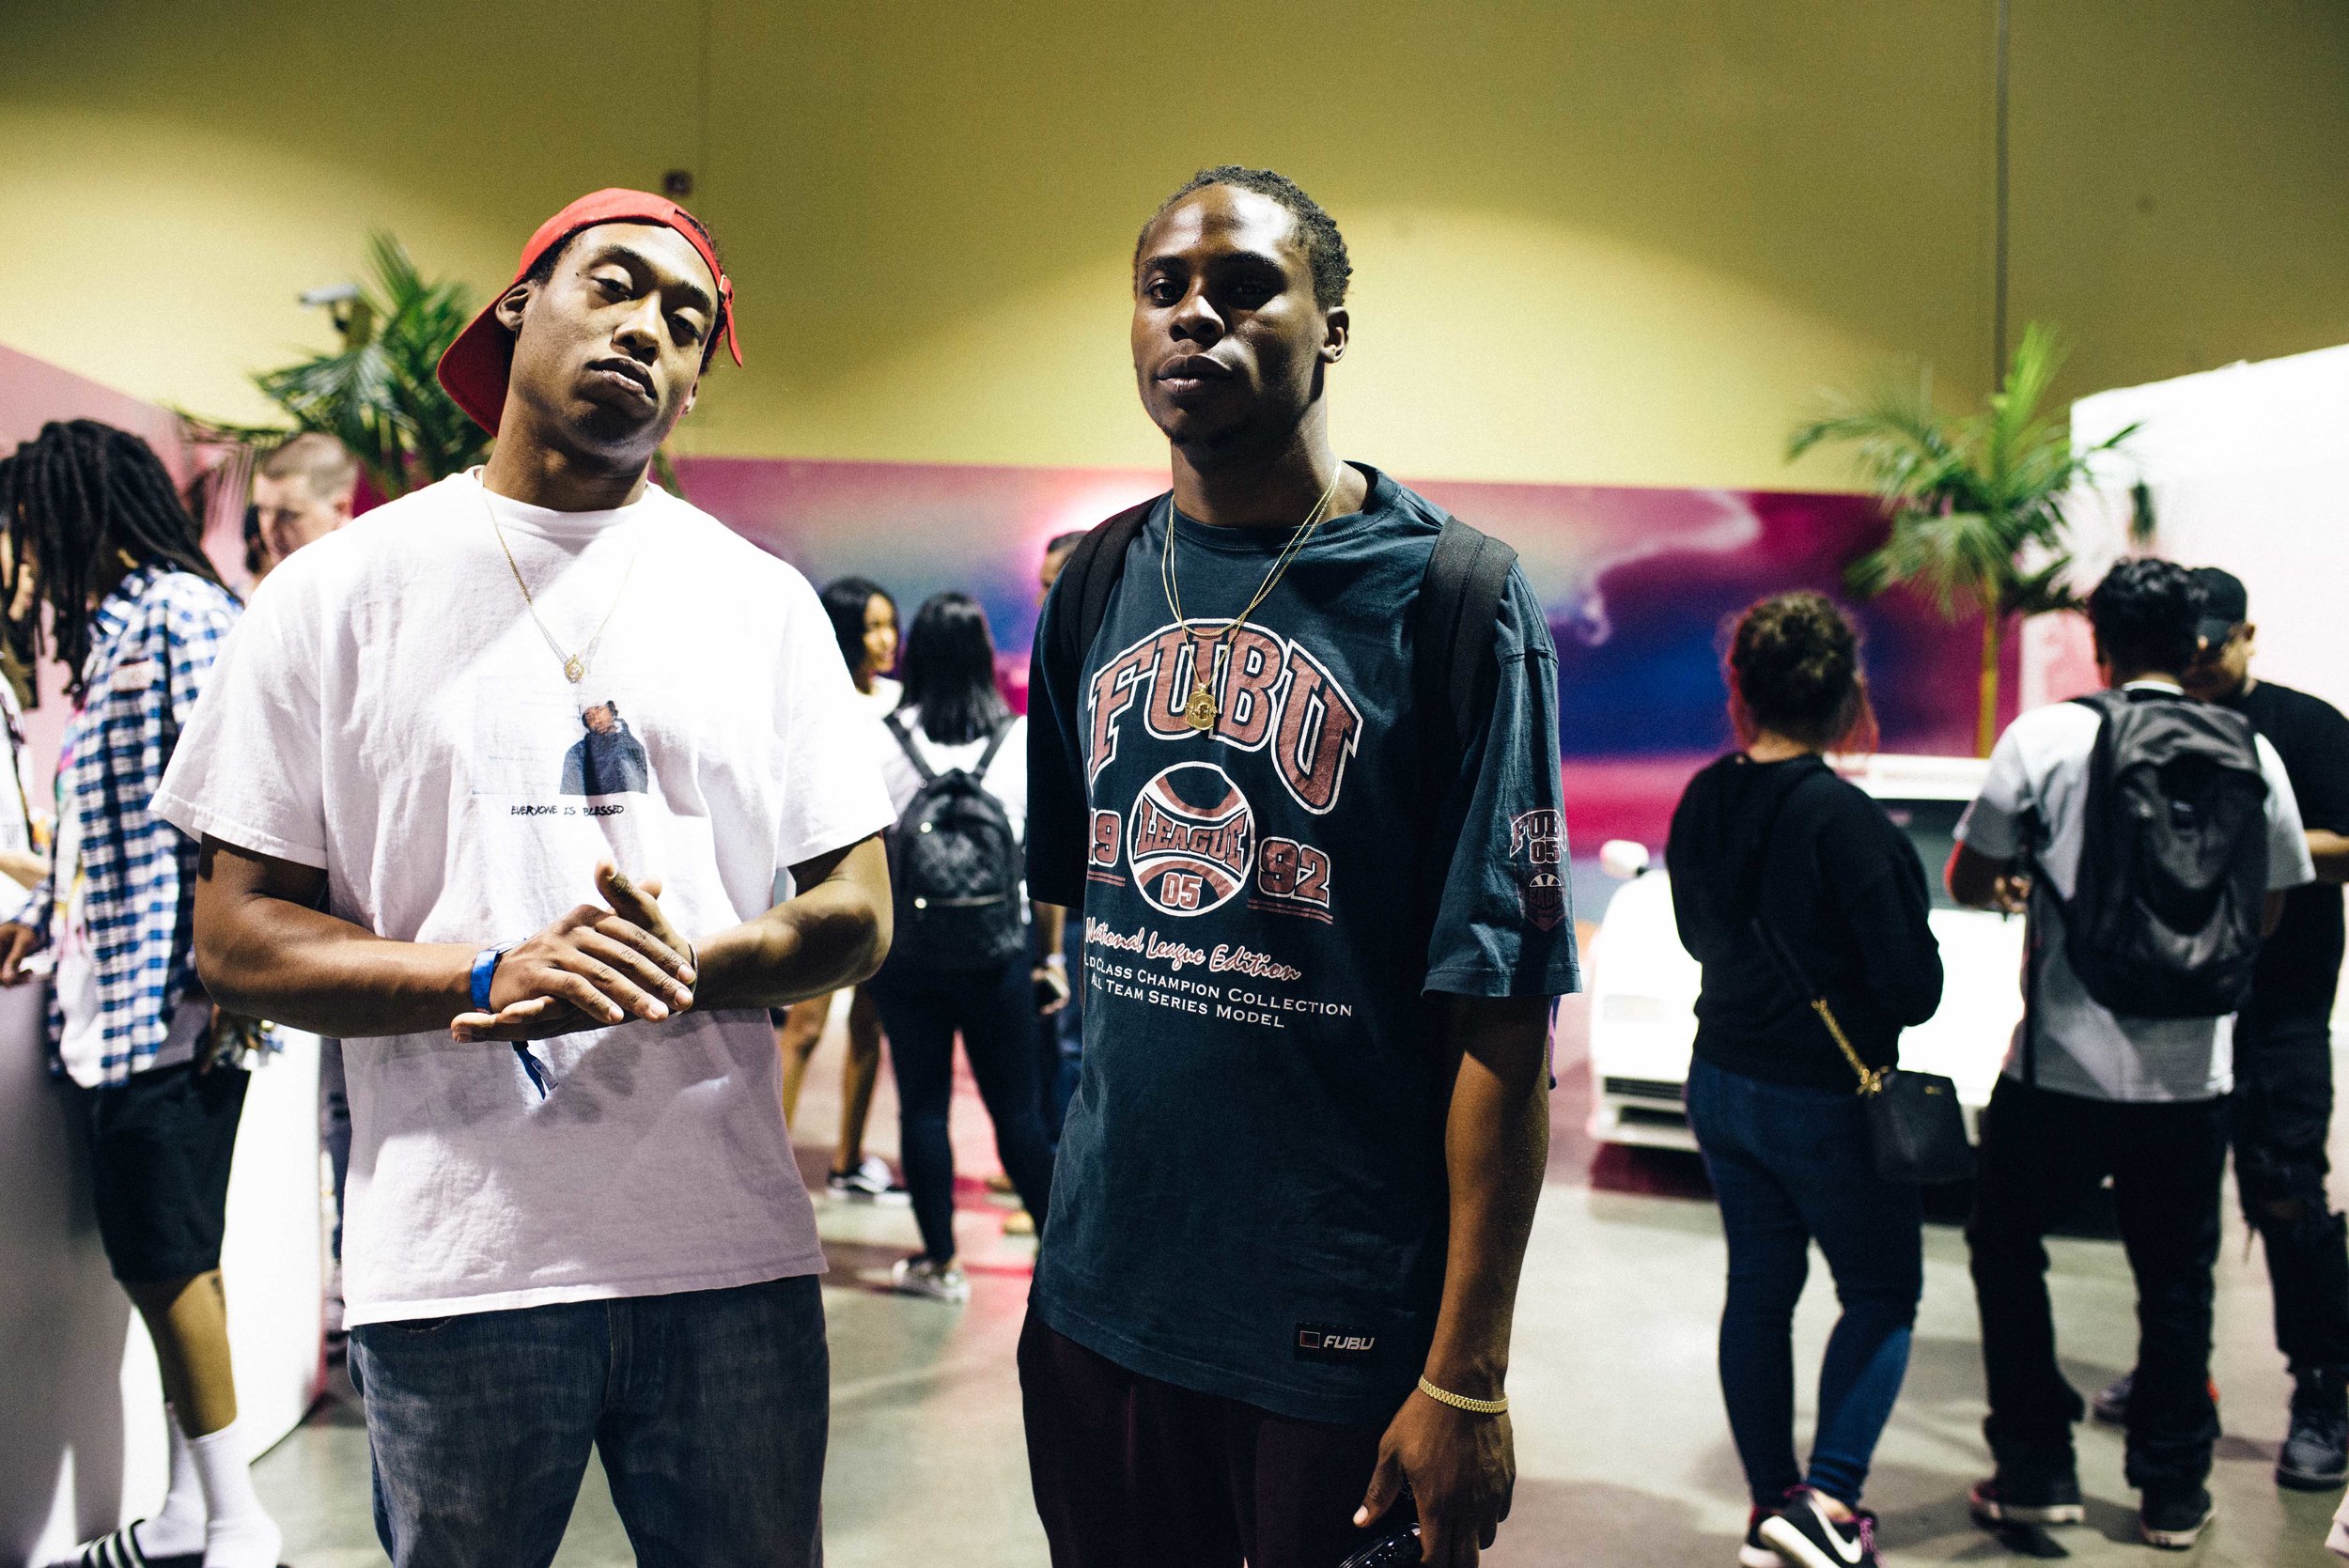  Danny and Obi O. of FriendsOnly™ at ComplexCon 2016. / Photo: © Diane Abapo for SUSPEND Magazine 